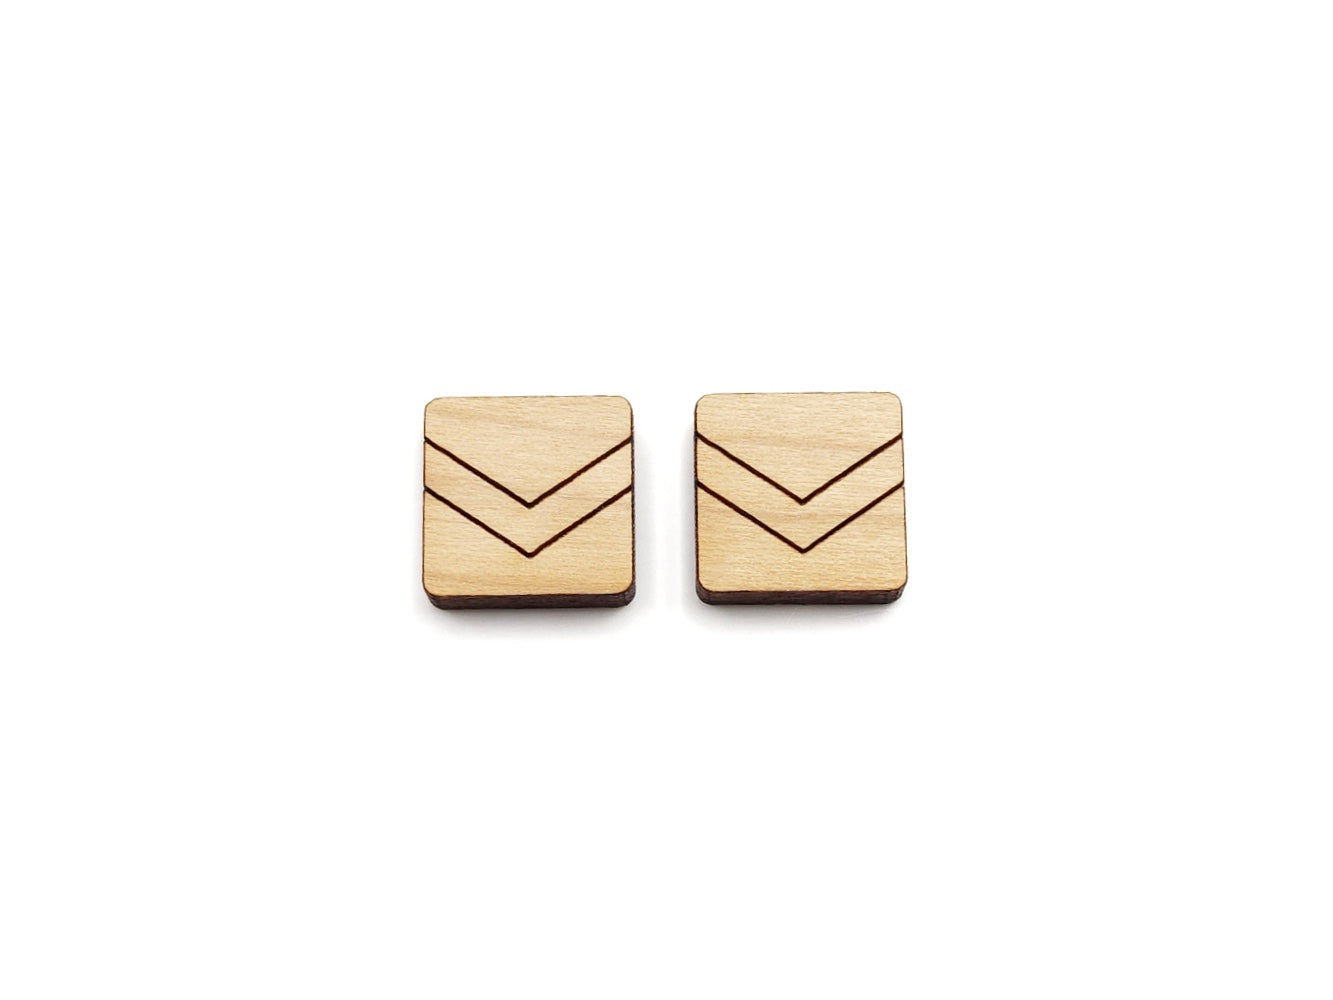 a pair of wooden cabochon stud earring blanks cut in a square shape and engraved with a chevron